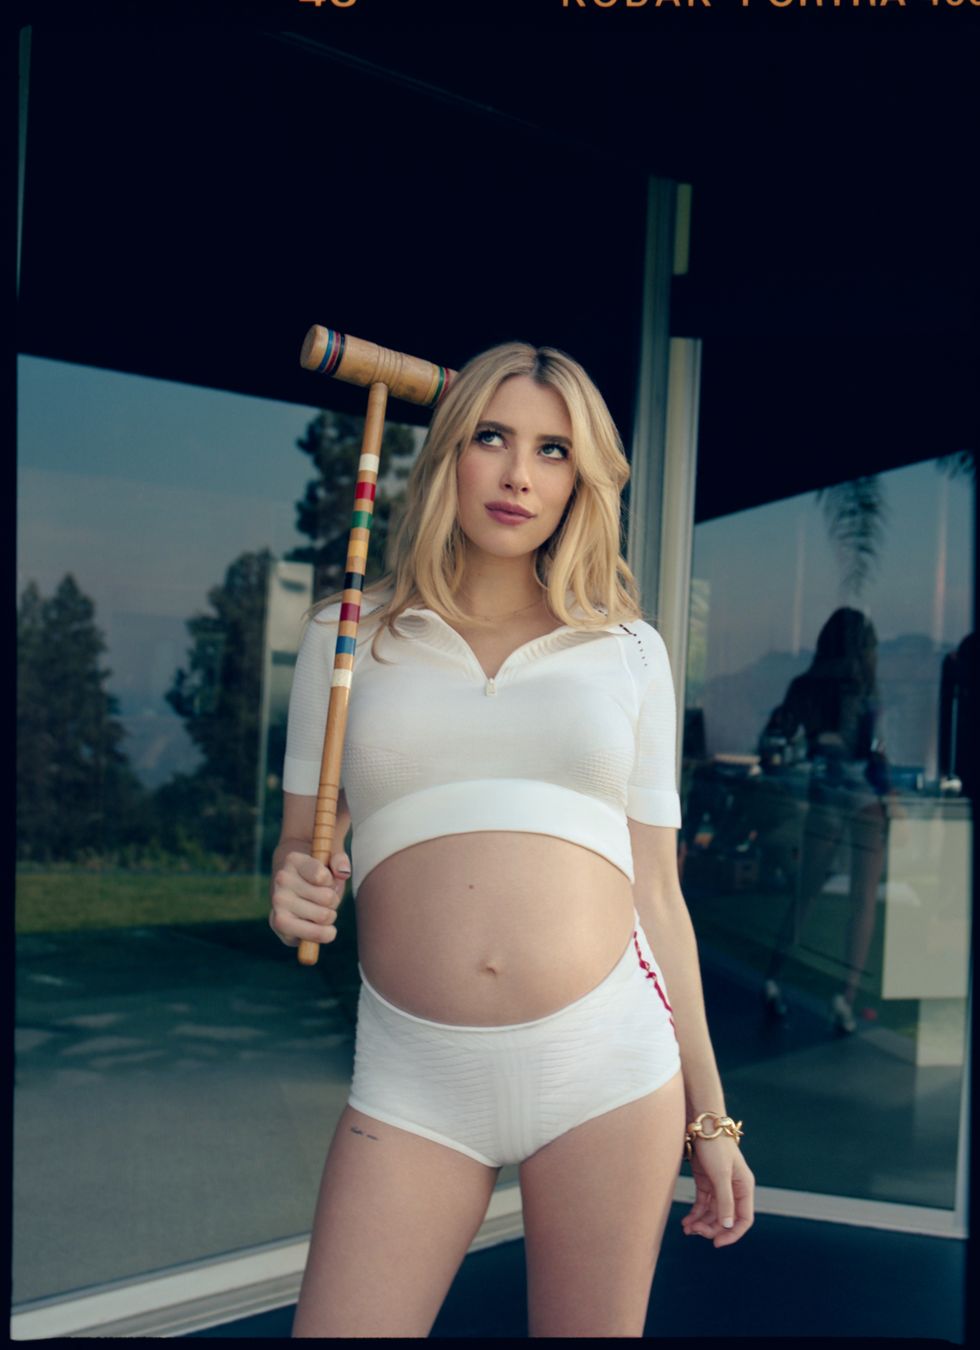 emma roberts, pregnant, wearing white crop top and shorts, holding uo croquet mallet next to head, standing in front of windows of home